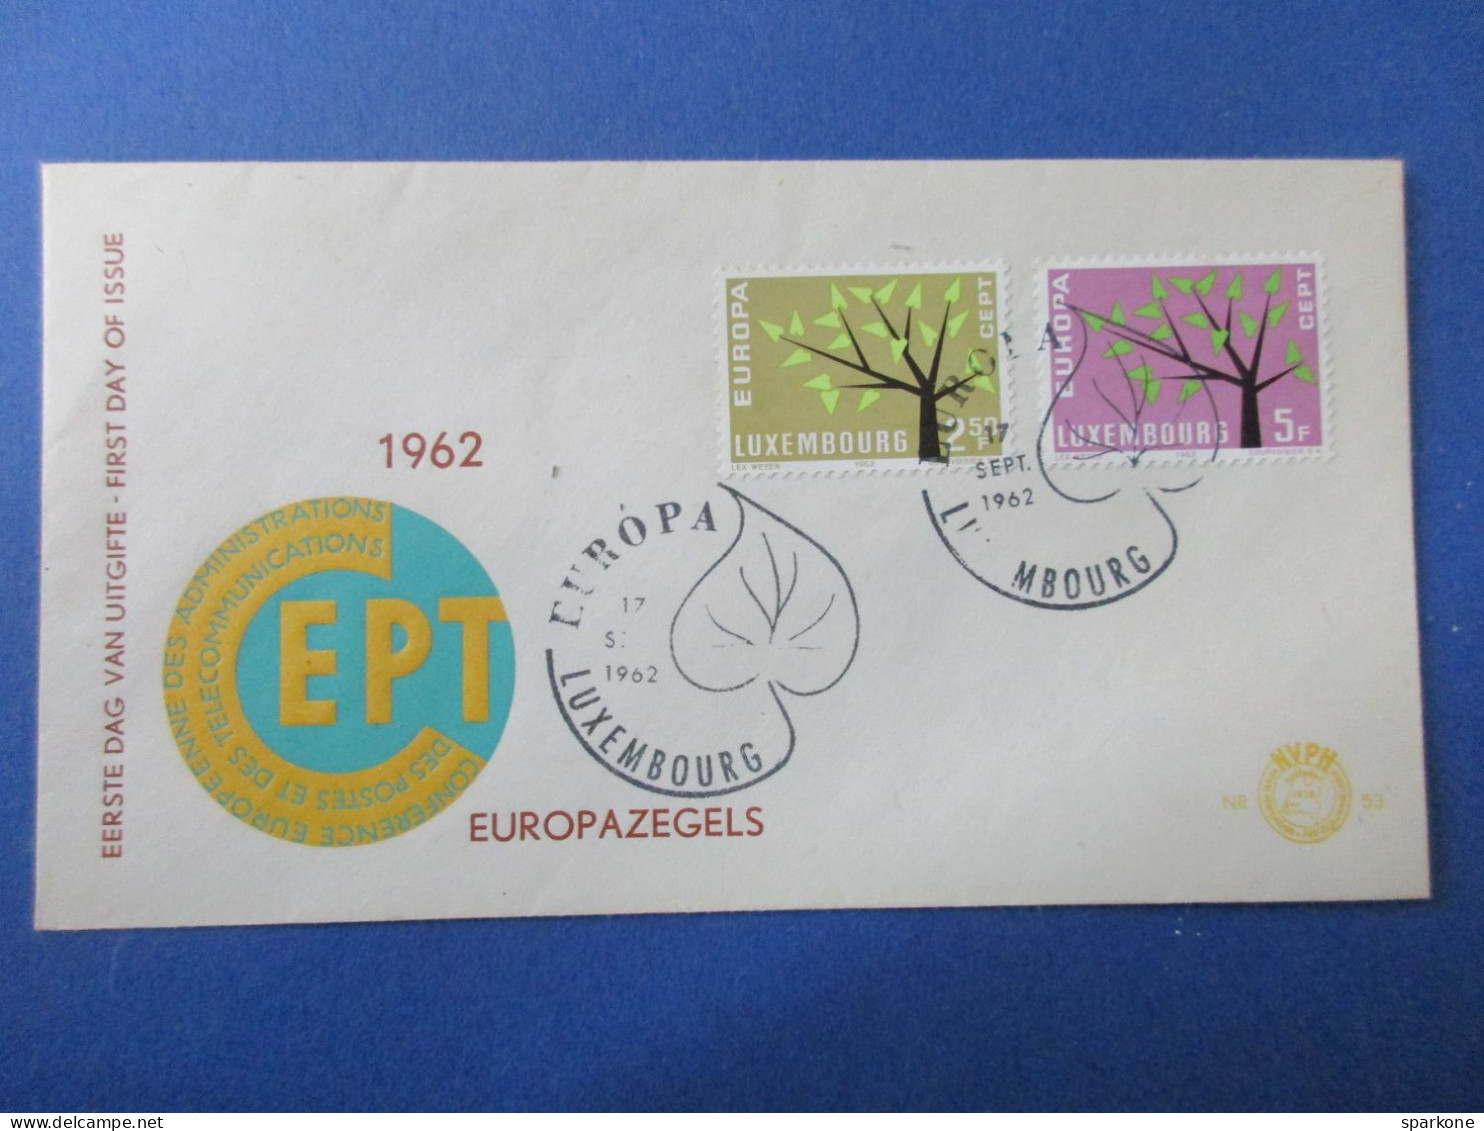 Marcophilie - Enveloppe - Luxembourg - Europazegels - 1962 - FDC